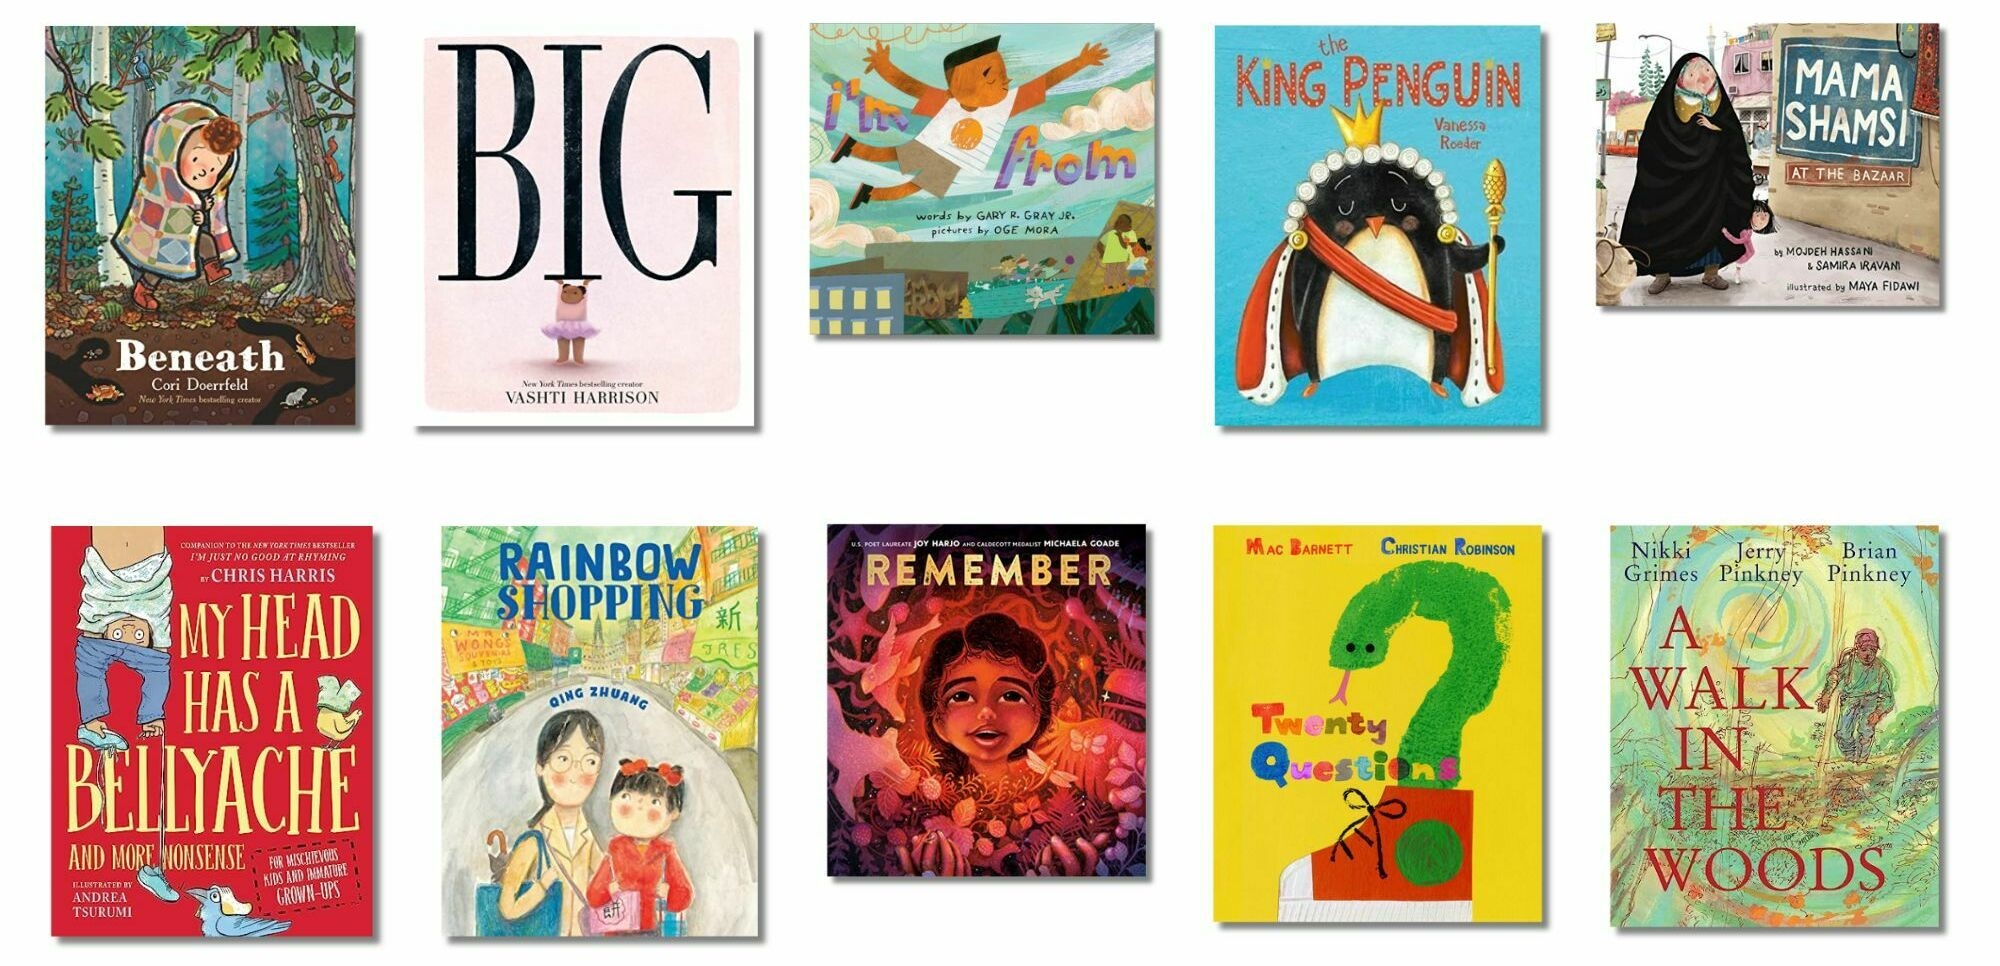 Book covers of: Beneath, Big, I&#039;m From, The King Penguin, Mama Shamsi at the Bazaar, My Head Has a Bellyache, Rainbow Shopping, Remember, Twenty Questions and A Walk in the Woods 